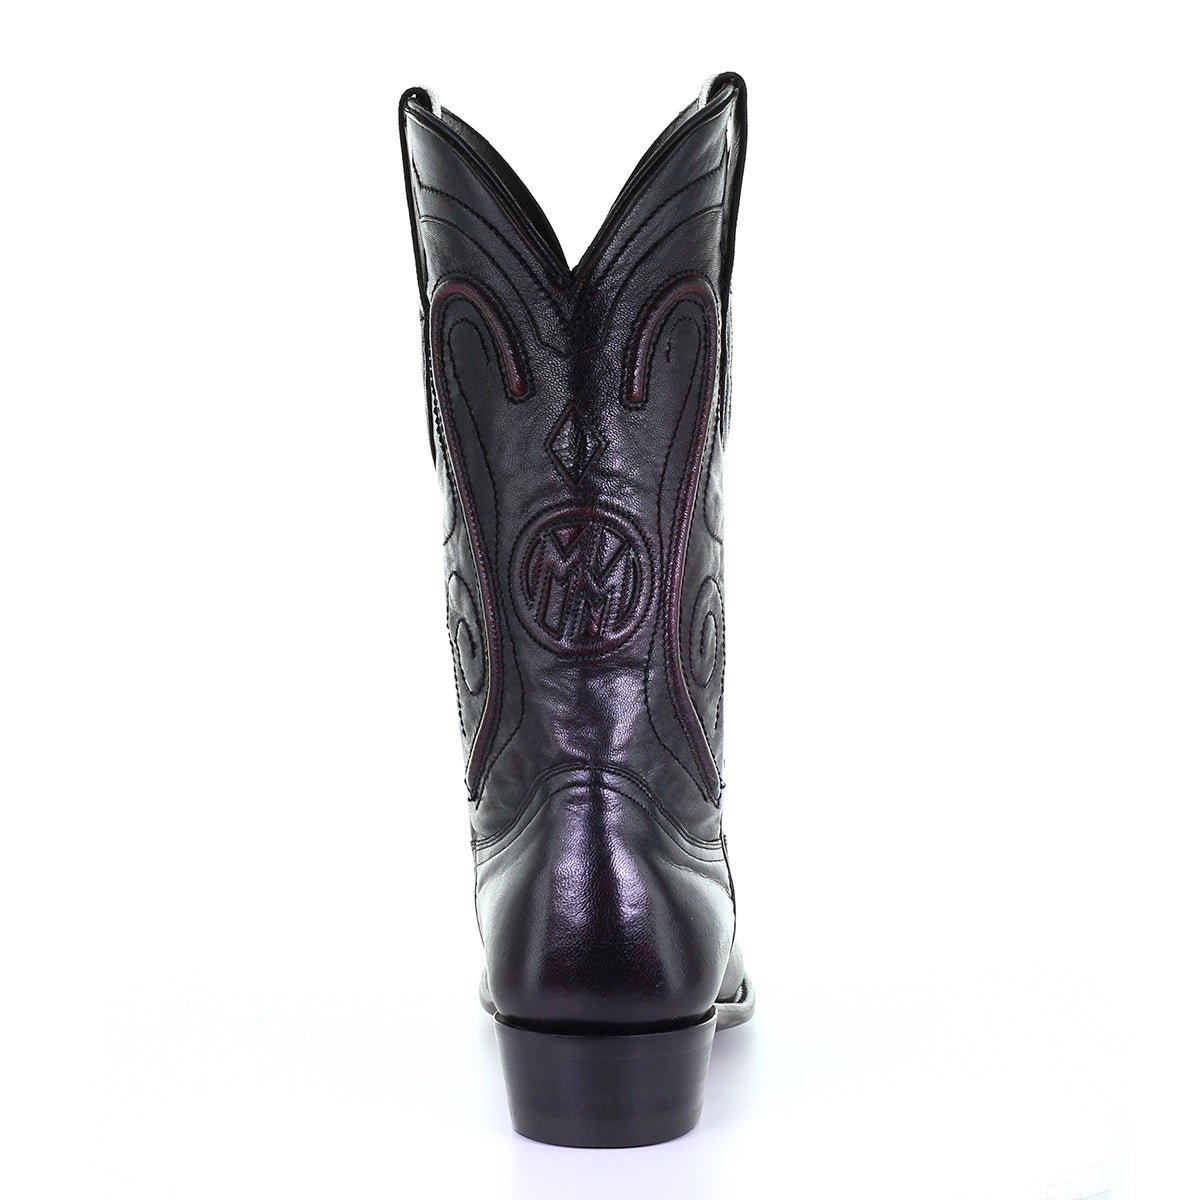 M2137 - Montana black cherry traditional cowboy cowhide leather boots for men-Kuet.us